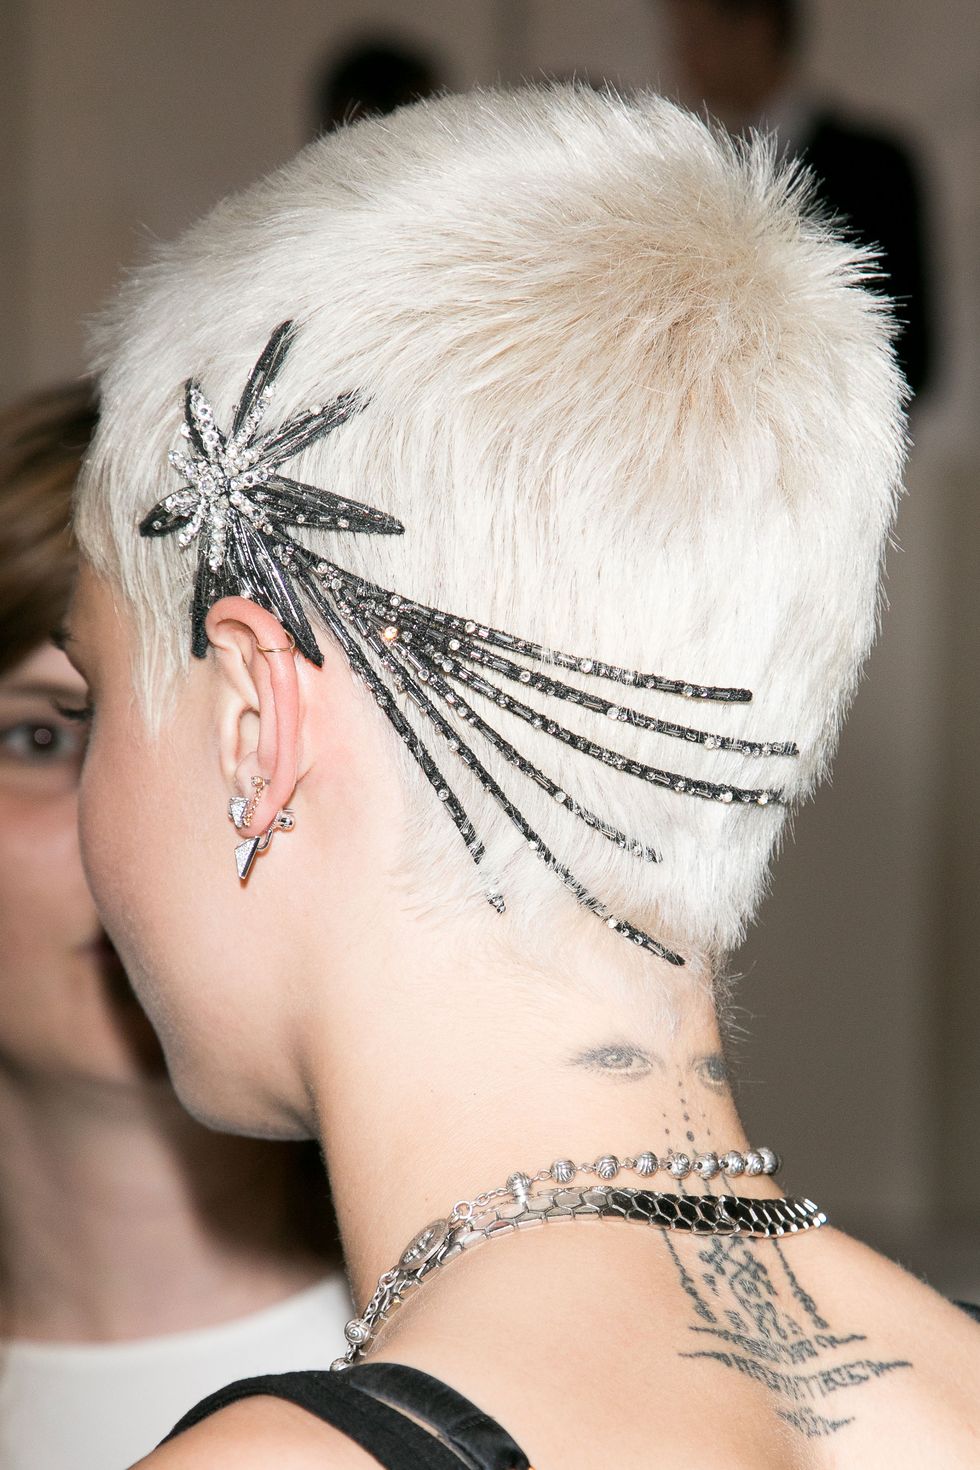 Hair, Hairstyle, Feather, Headpiece, Shoulder, Fashion, Tattoo, Neck, Hair accessory, Fashion accessory, 